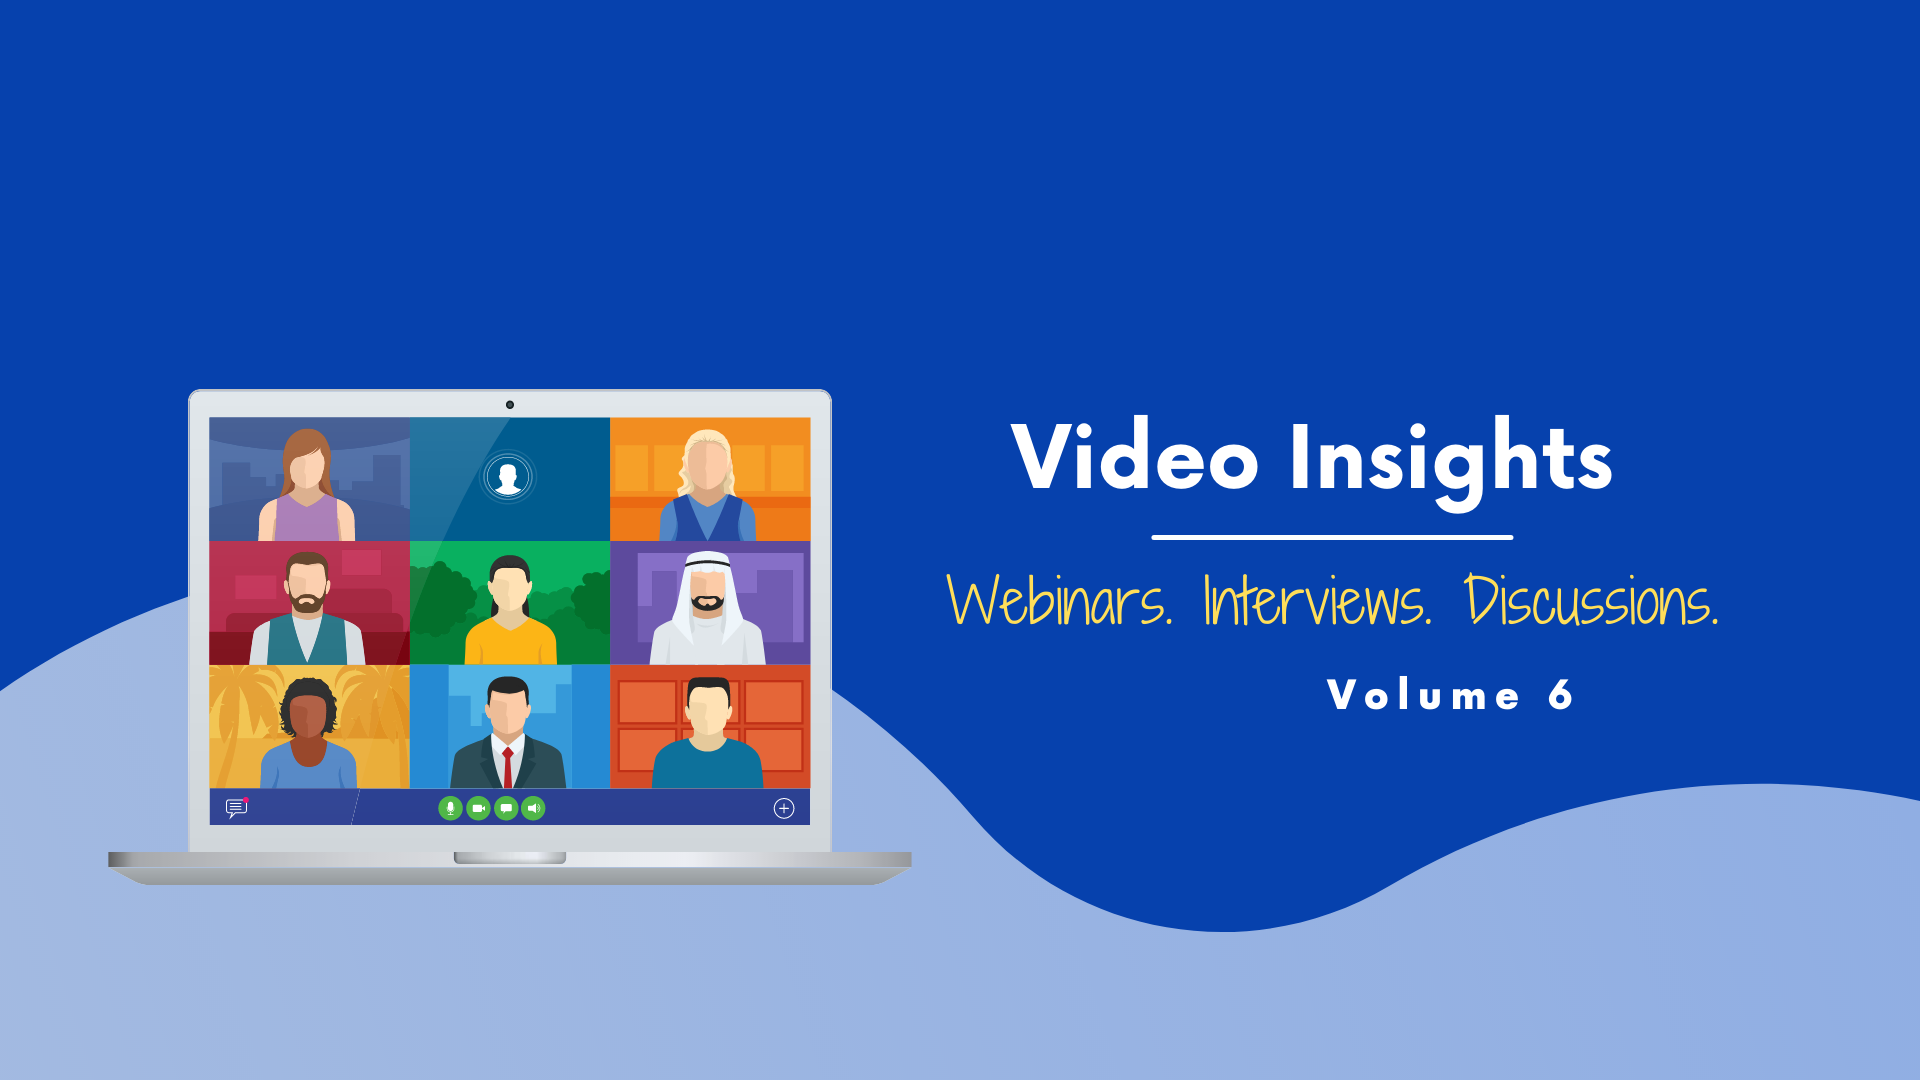 Video Insights: Webinars & Discussions (Volume 6)